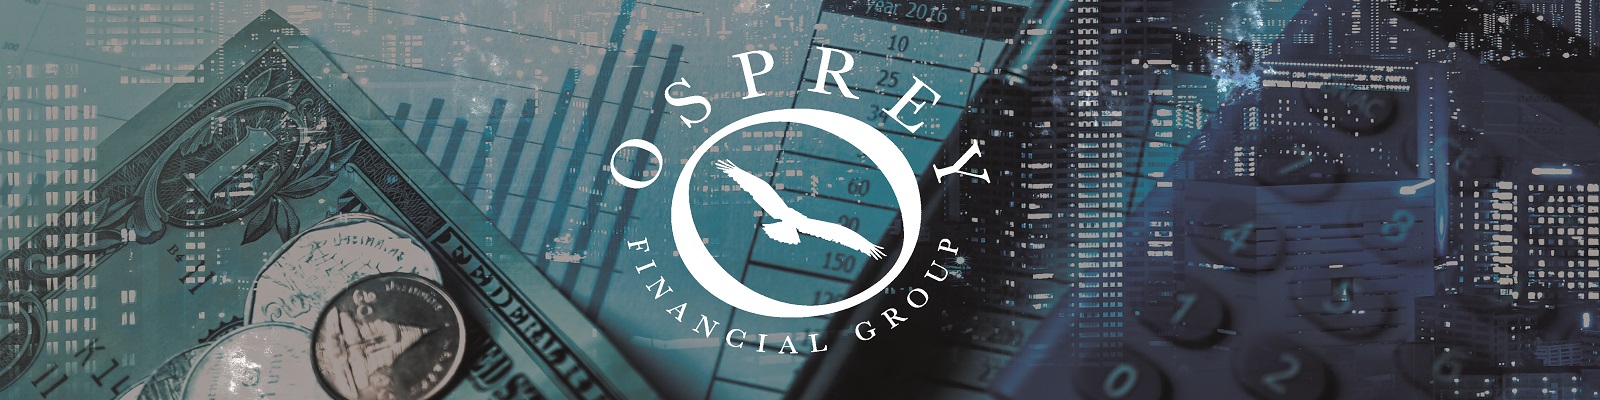 Osprey Financial Group written around a circle with a bird silhouette and buildings, money, and calculator. 